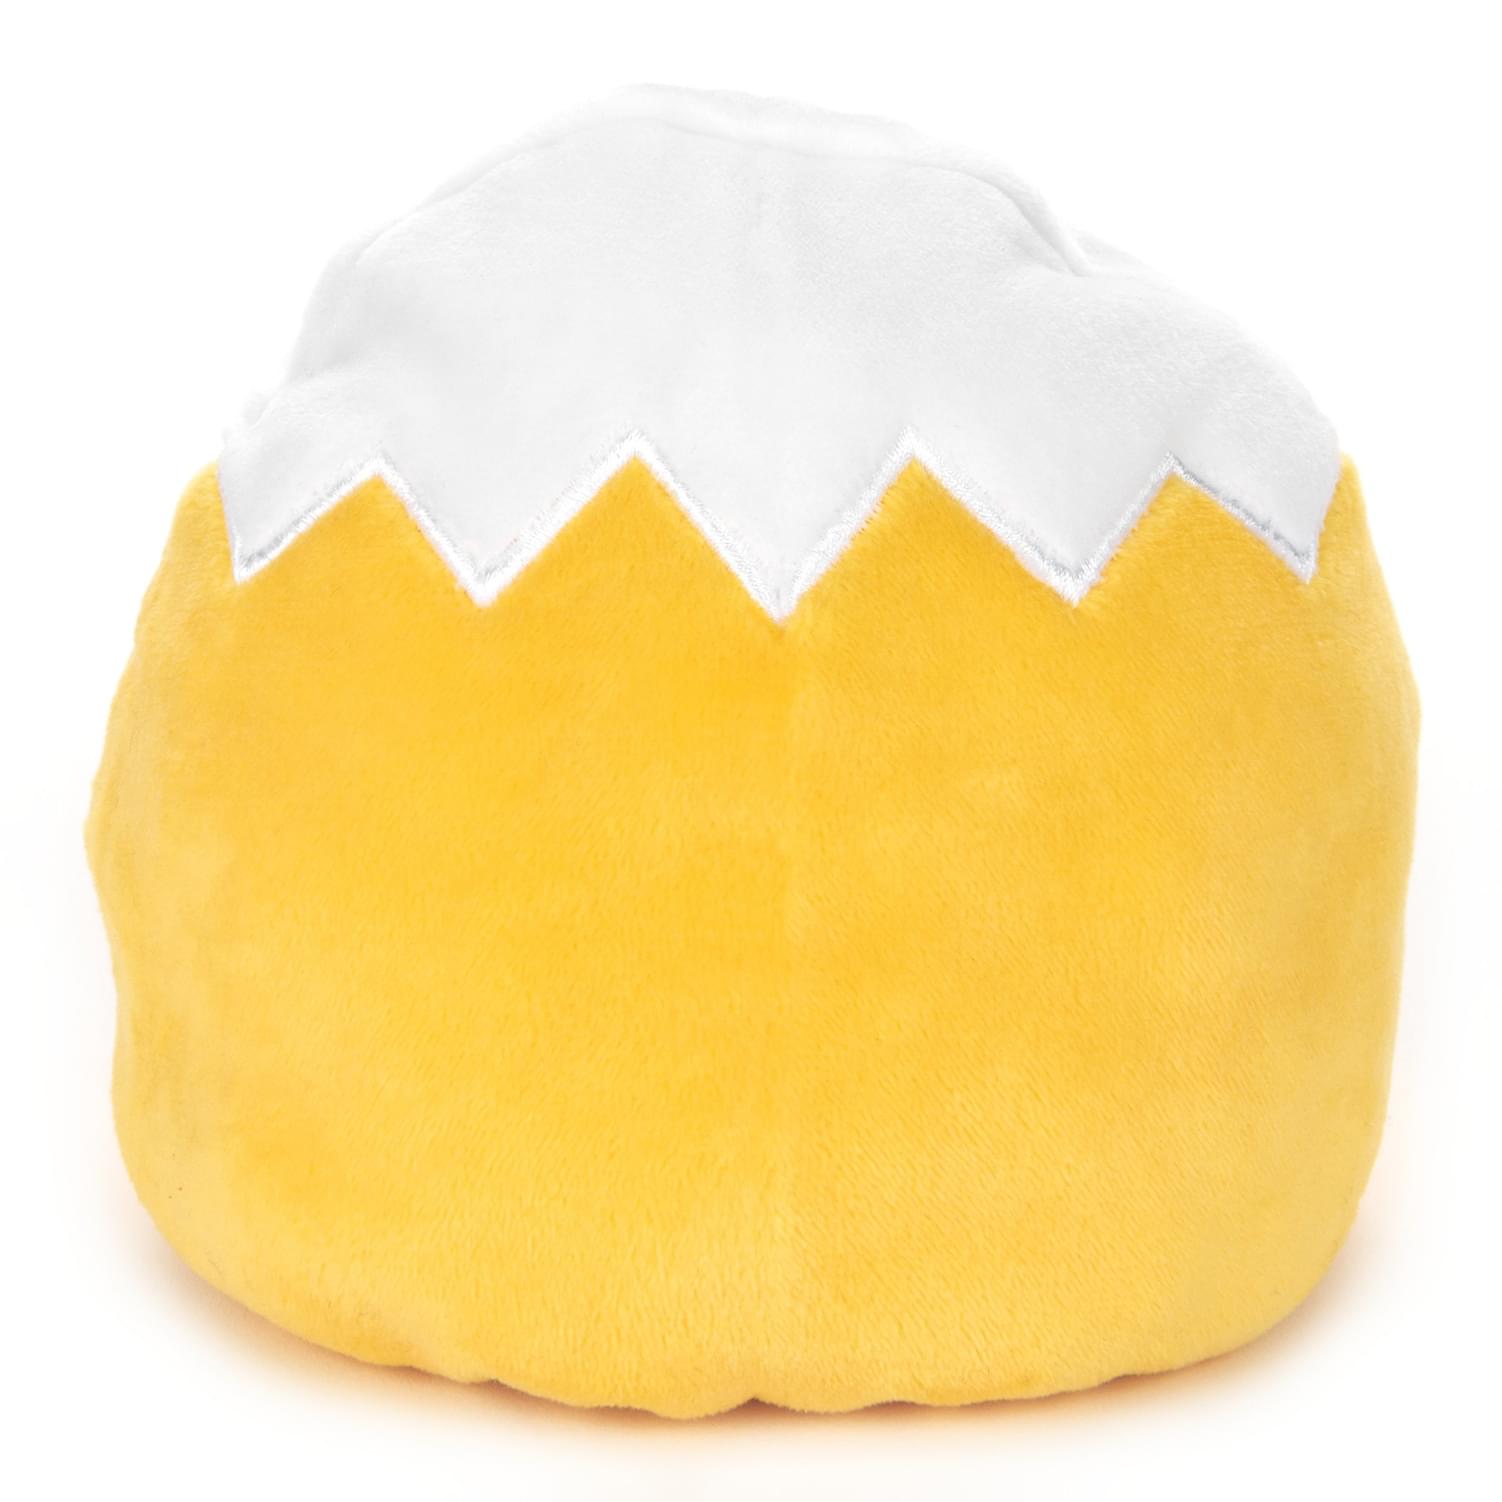 Gudetama The Lazy Egg Inside Out 5.5 Inch Two In One Plush